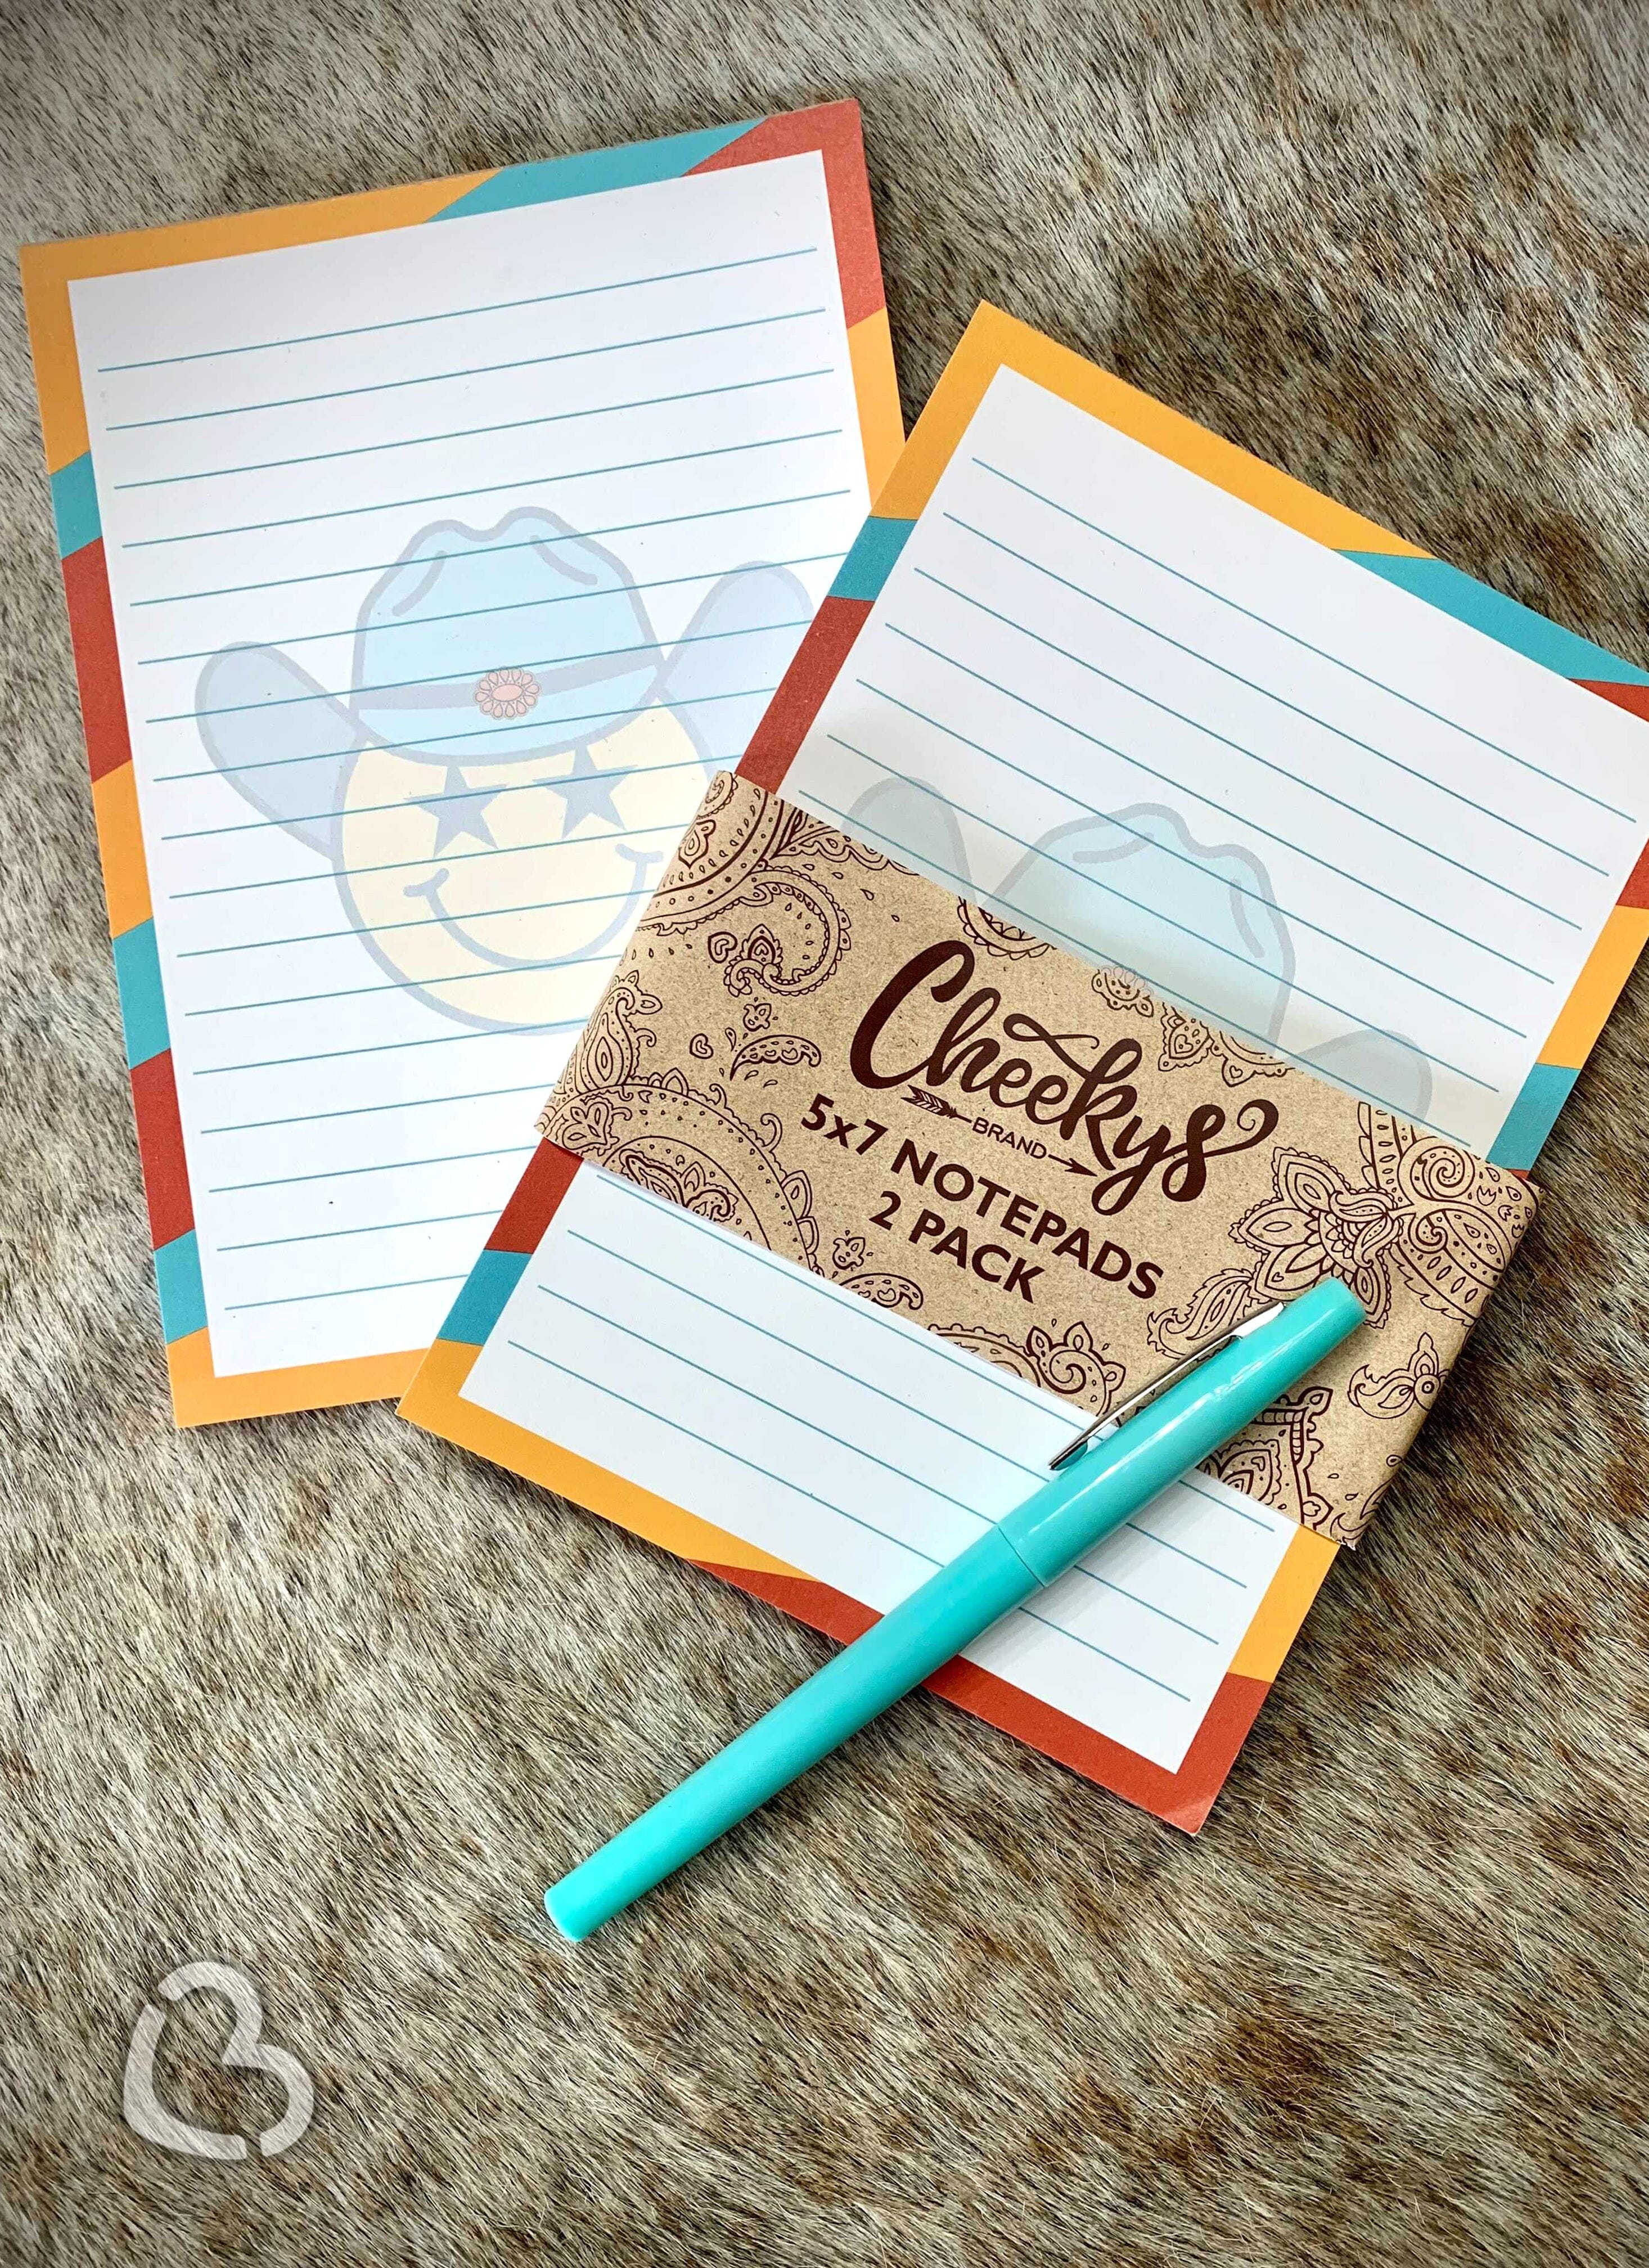 Smiley Cowboy Note Pad Set of 2 Accessories Cheekys Brand 